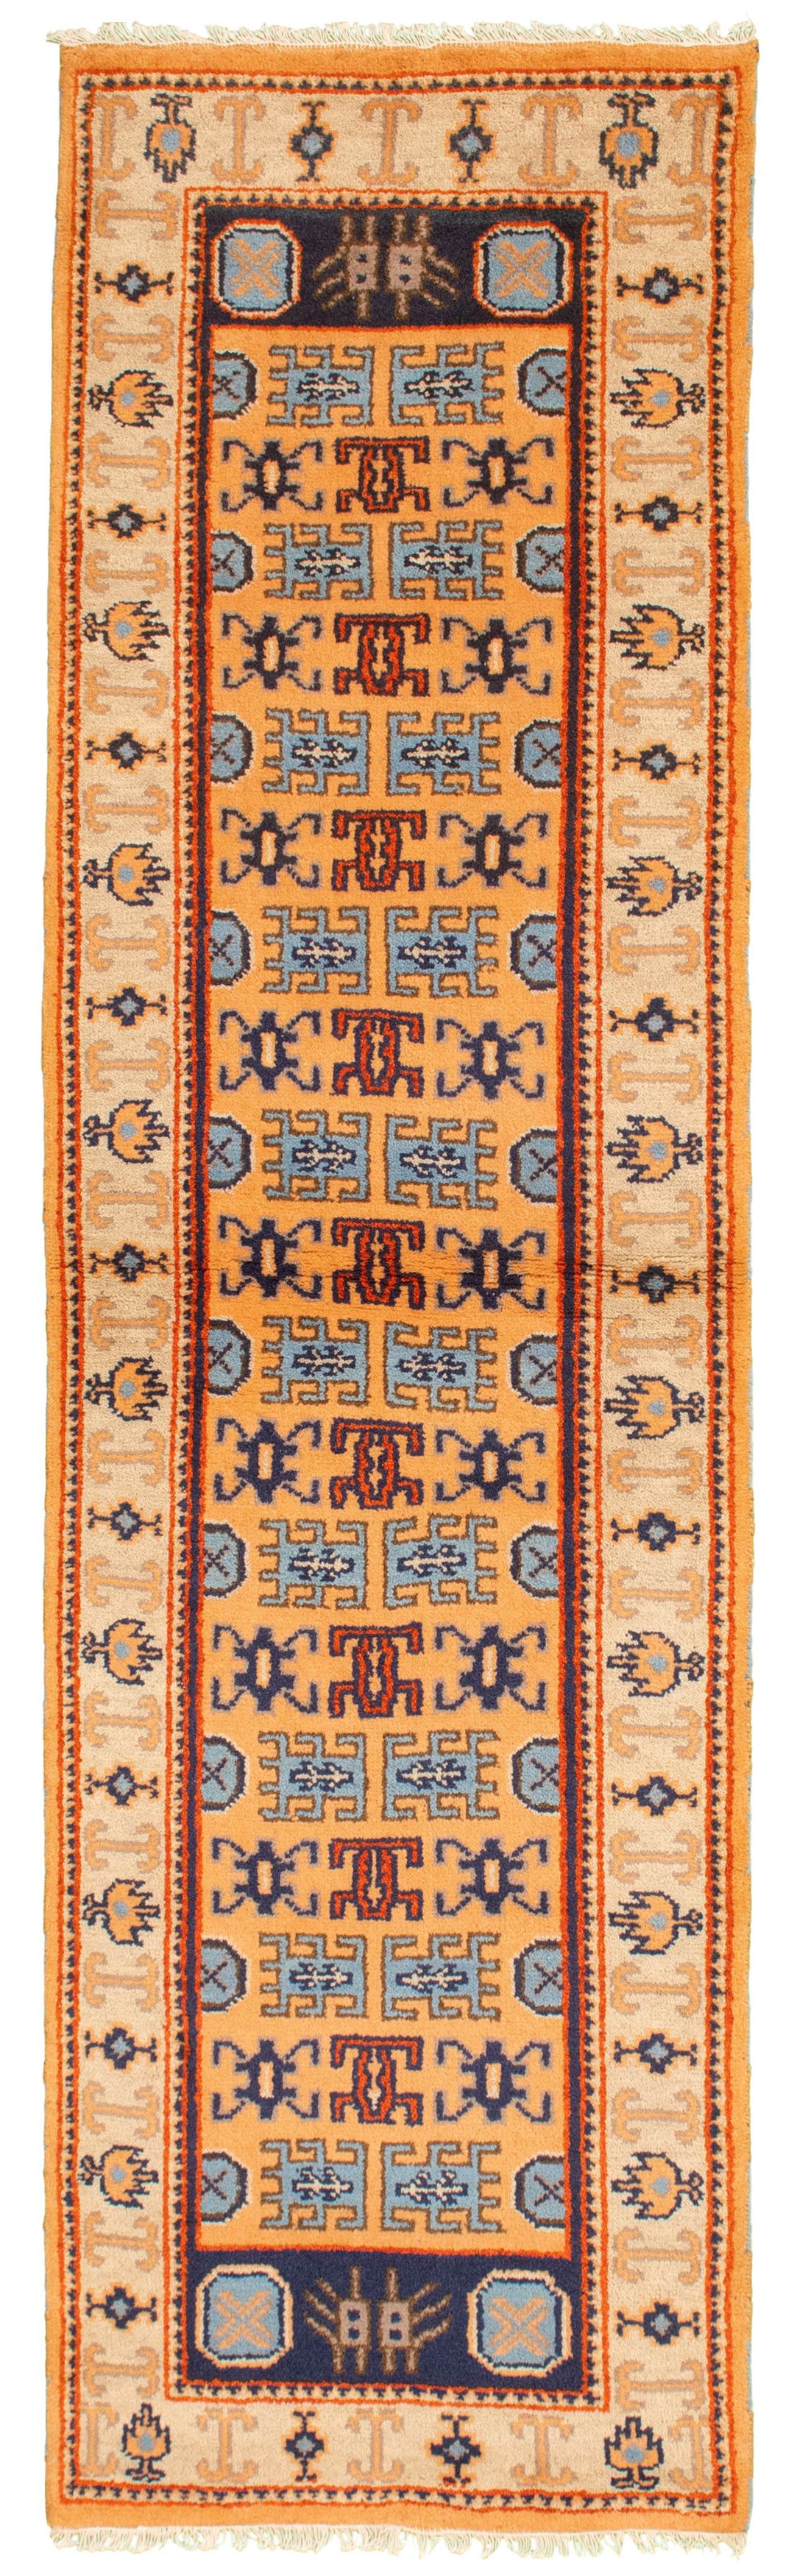 Hand-knotted Royal Kazak Copper Wool Rug 2'9" x 9'9"  Size: 2'9" x 9'9"  